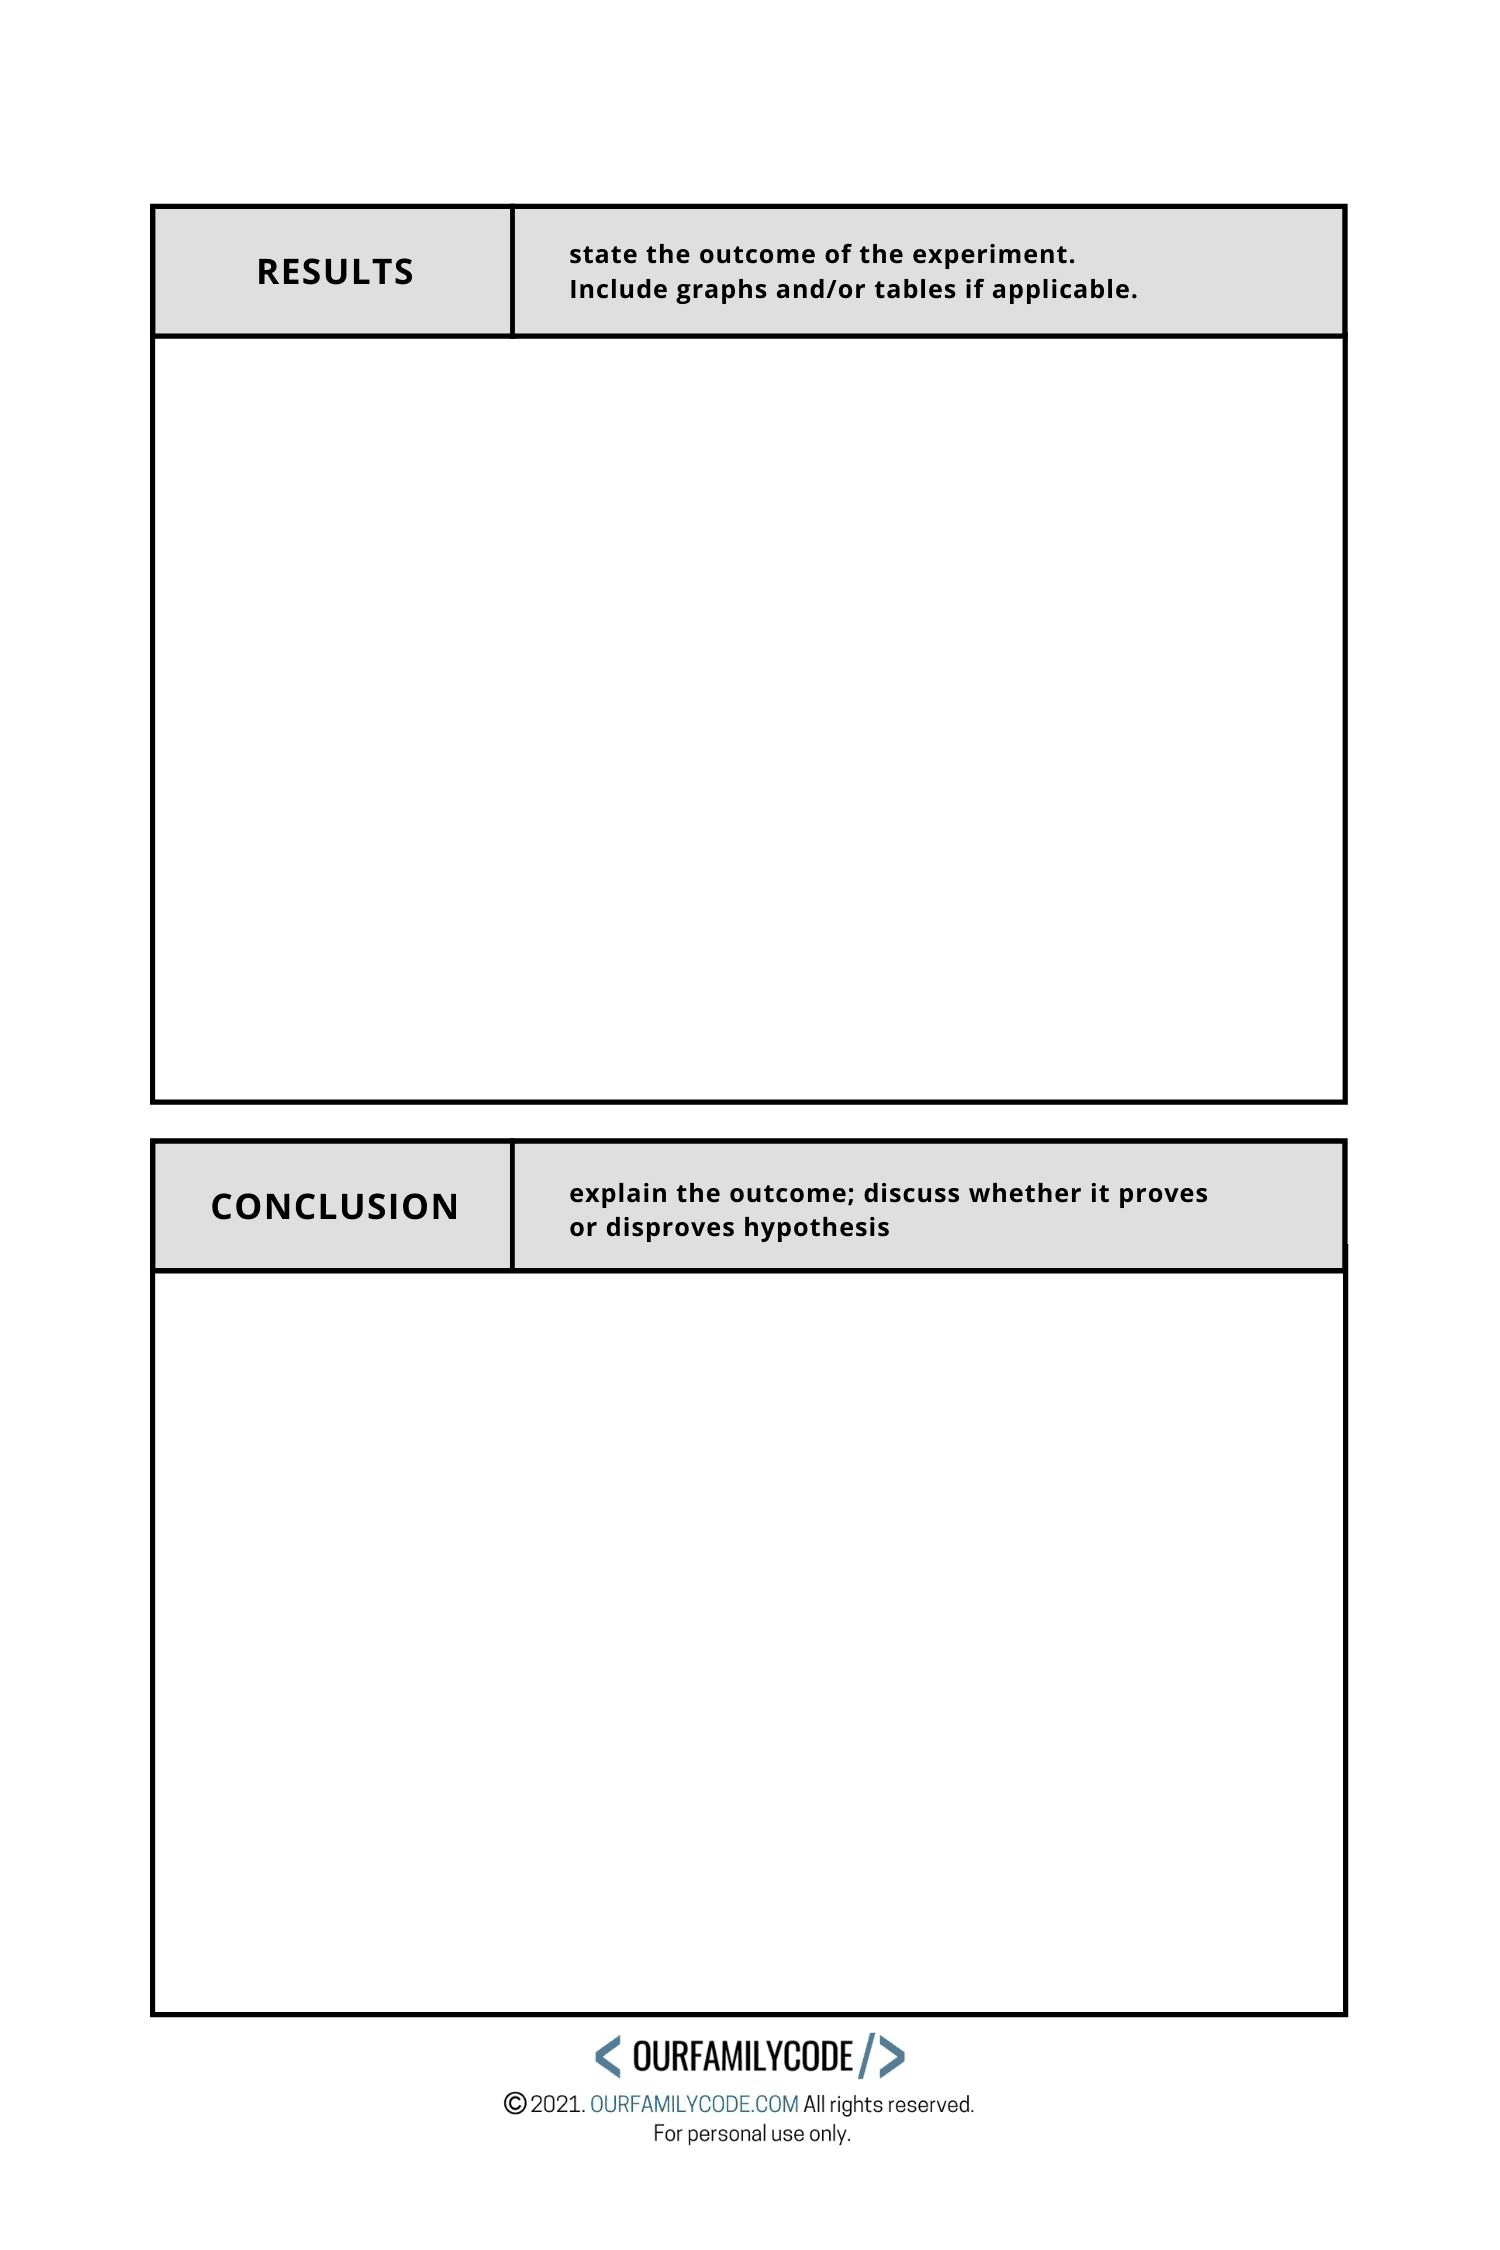 A picture of a blank scientific method worksheet for kids science fair experiments.